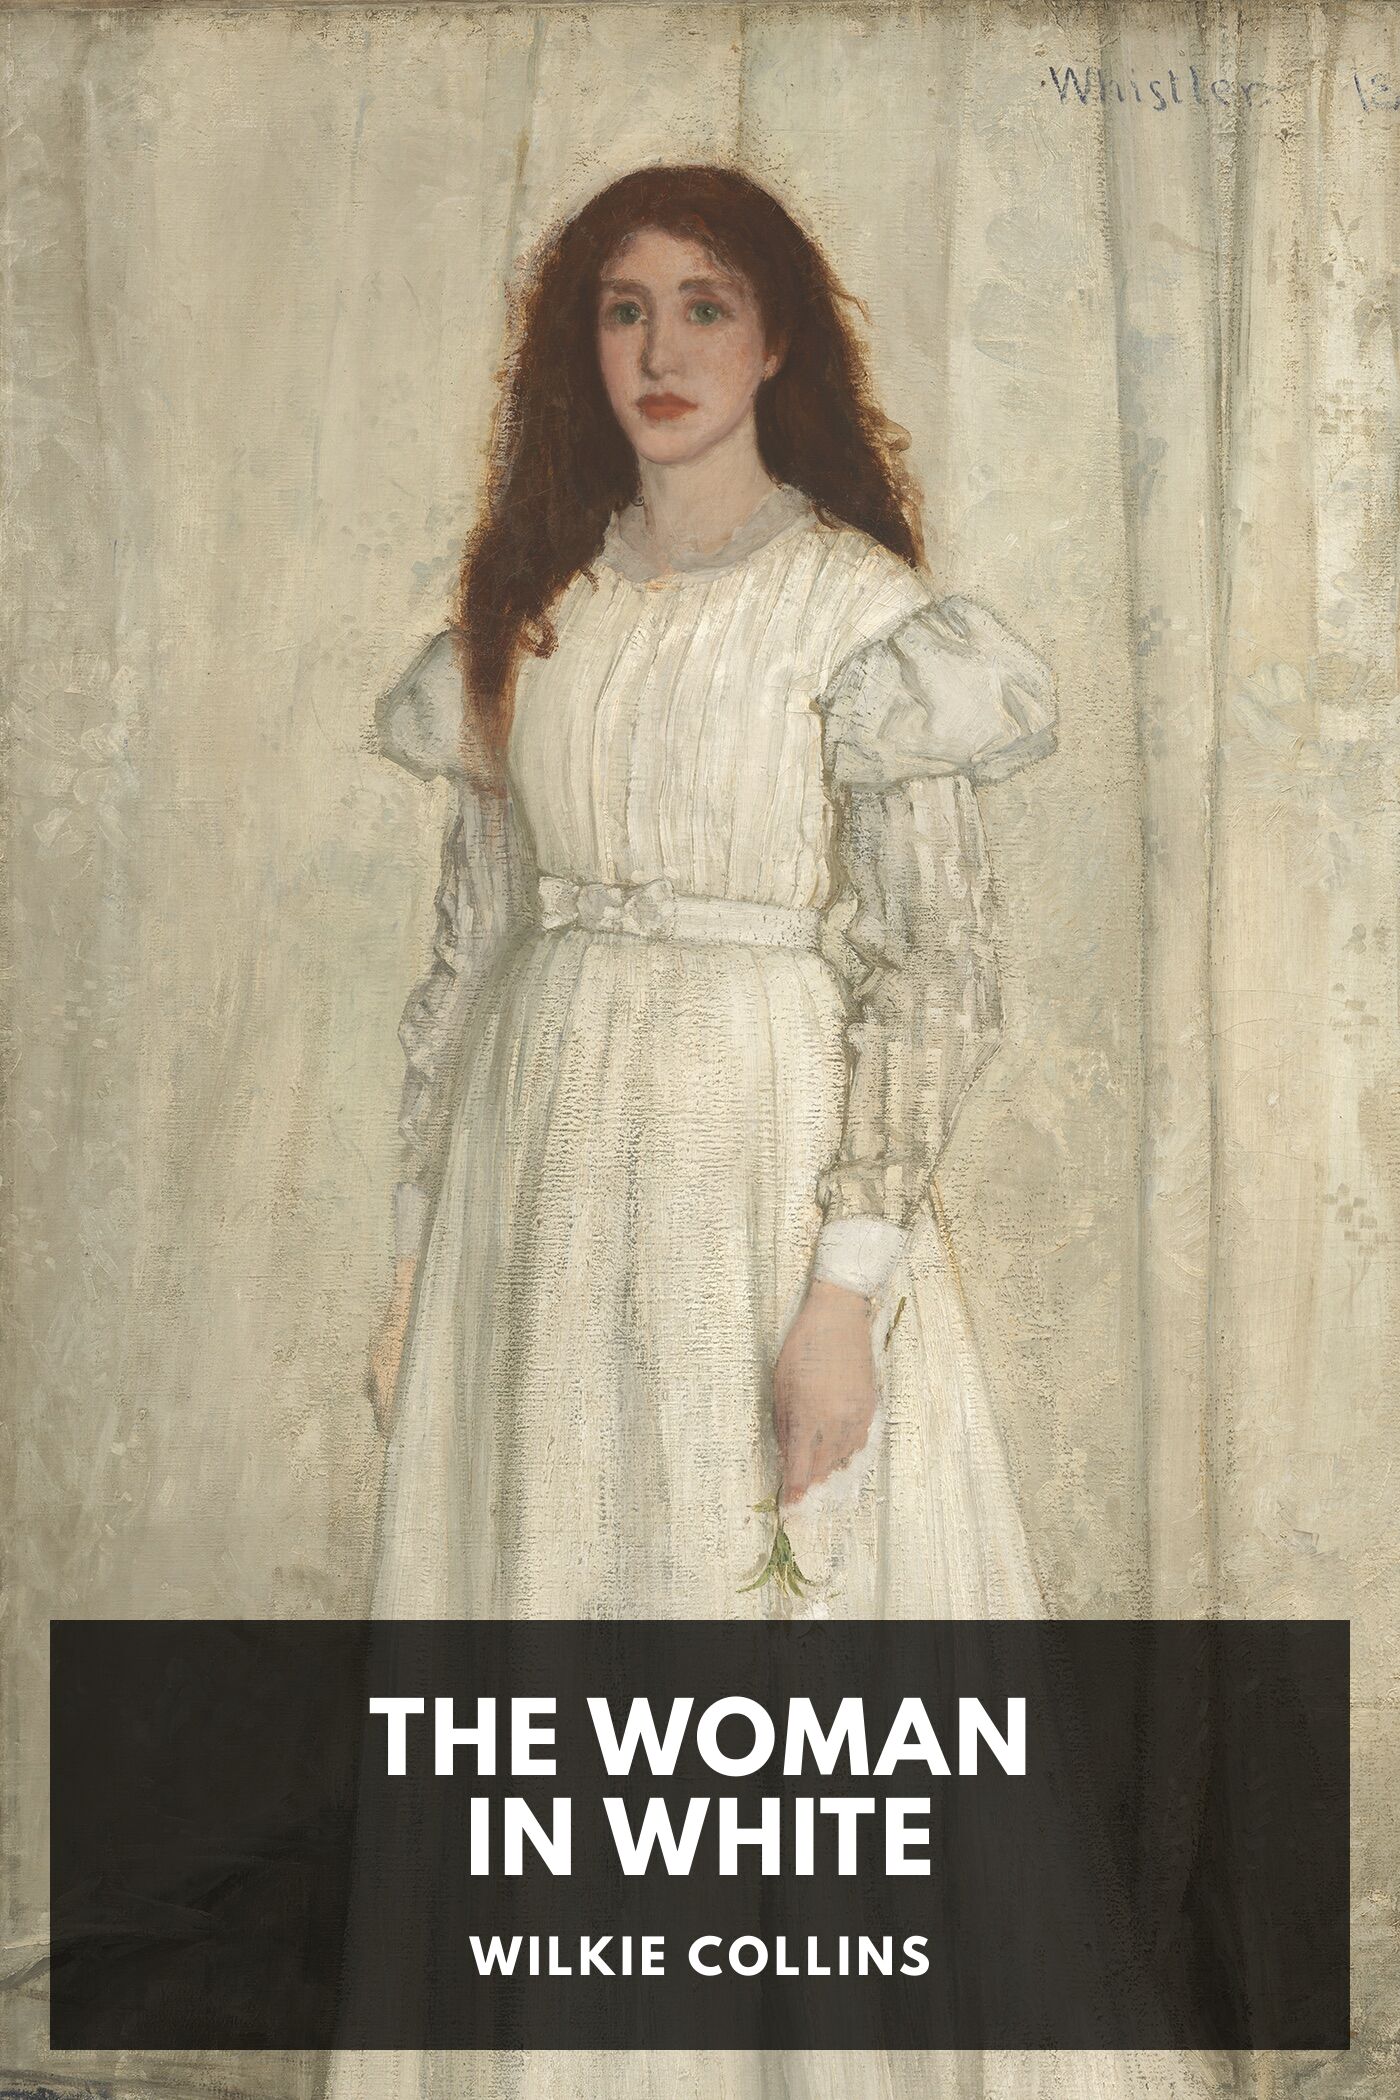 The Woman in White, by Wilkie Collins - Free ebook download - Standard  Ebooks: Free and liberated ebooks, carefully produced for the true book  lover.